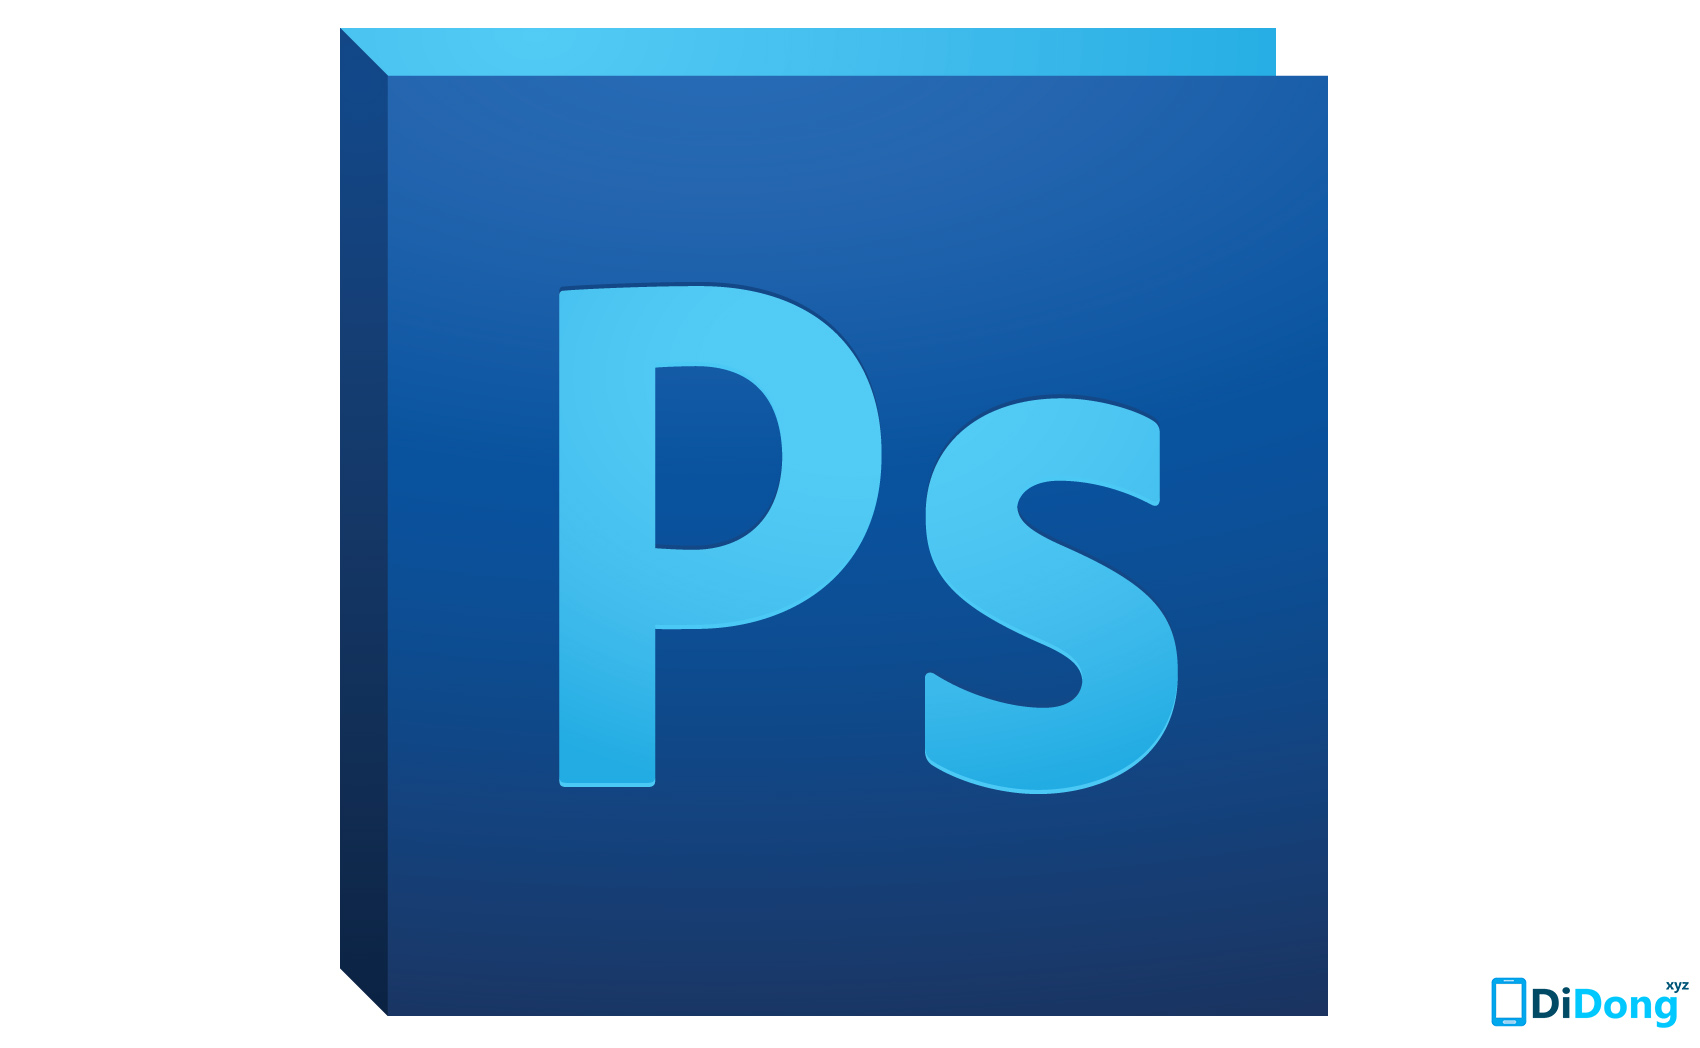 adobe photoshop cs5 extended portable free download